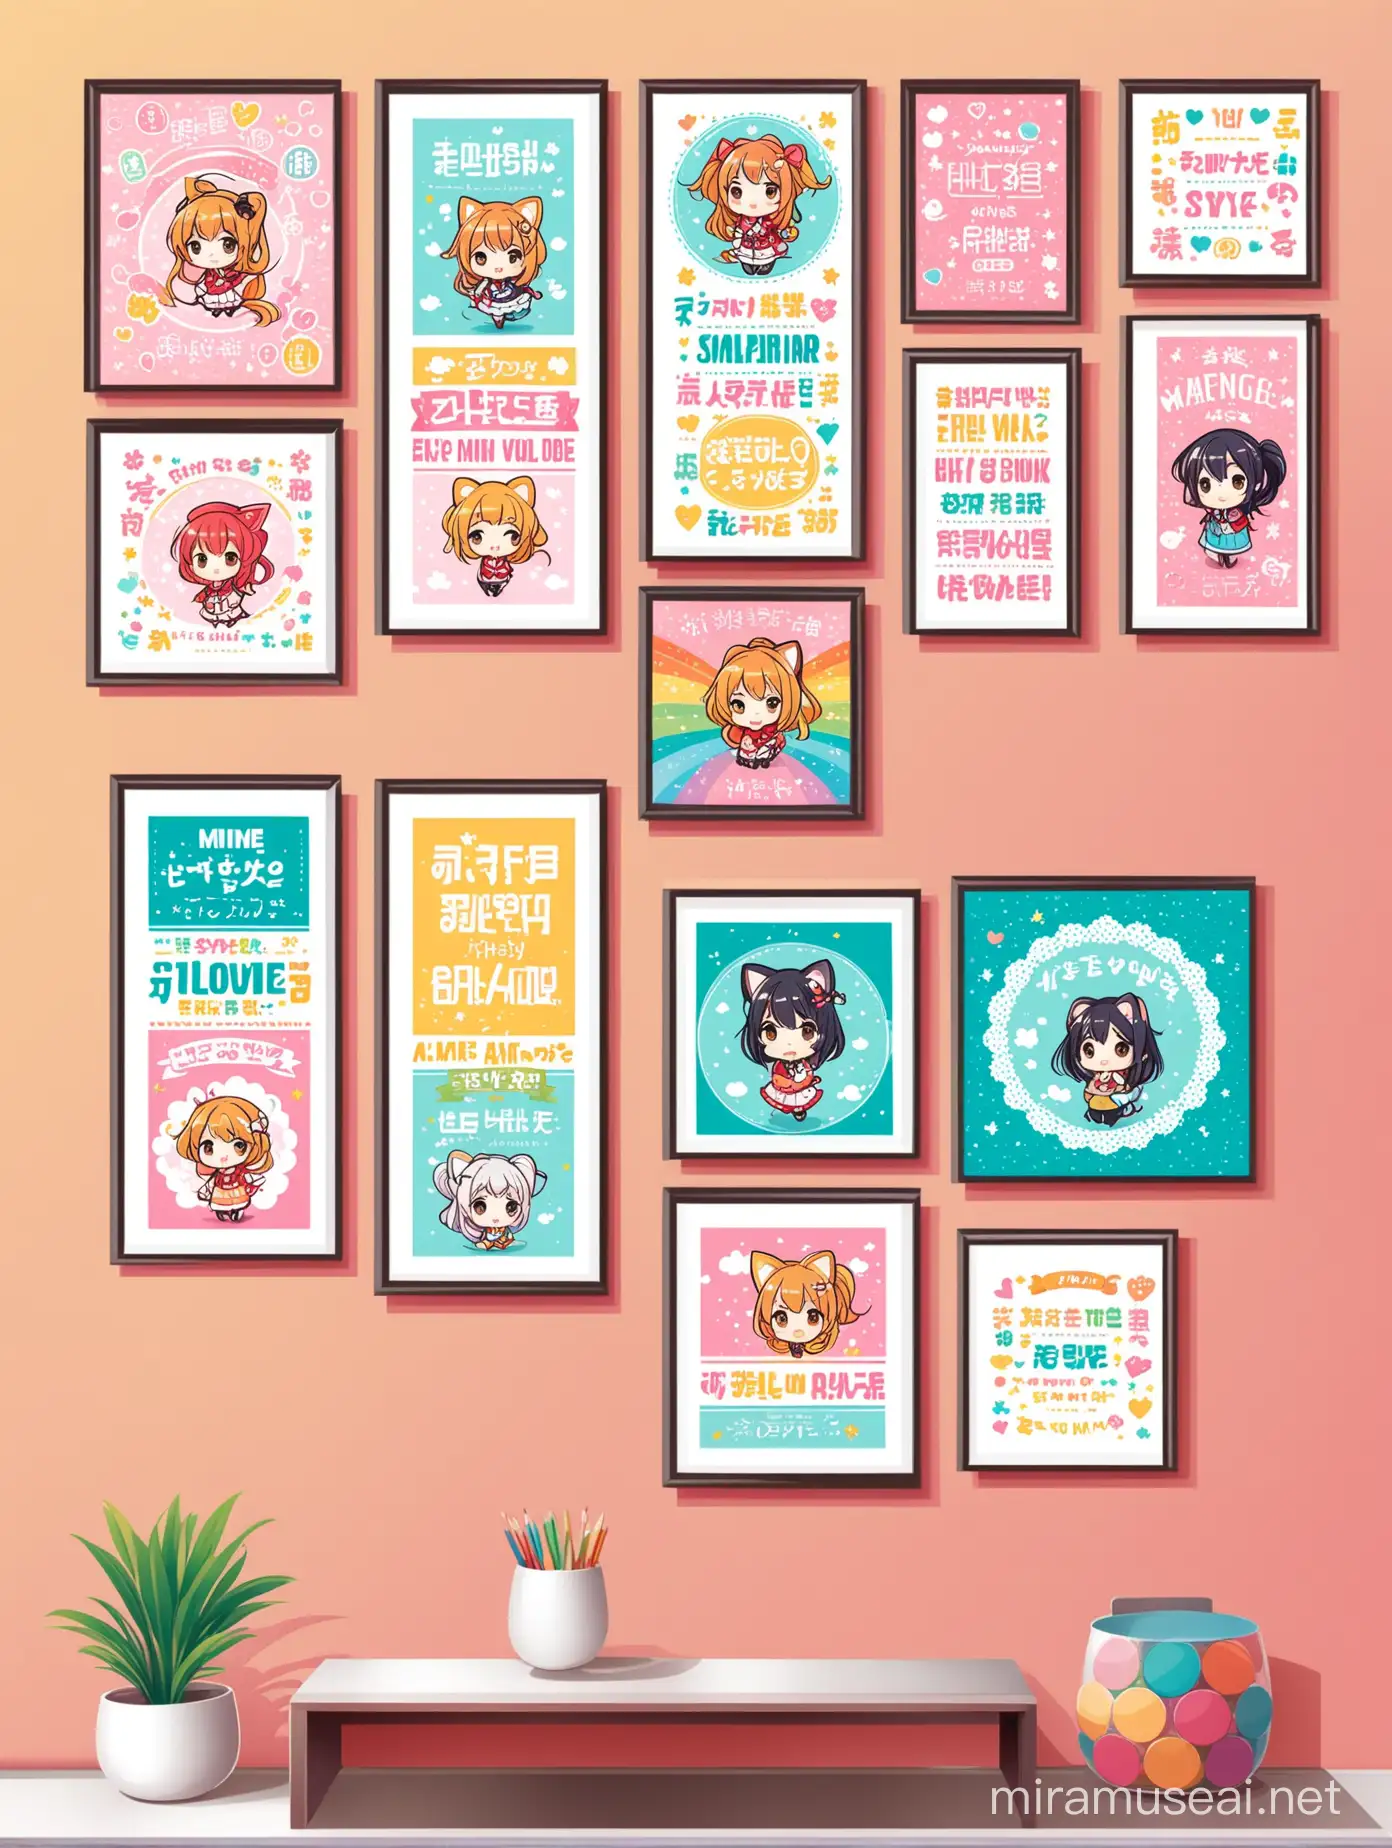 Anime style, Wall art frames, cute typography and quotes art , multiple frames arranged nicely, colorful, vector art, digital illustrations